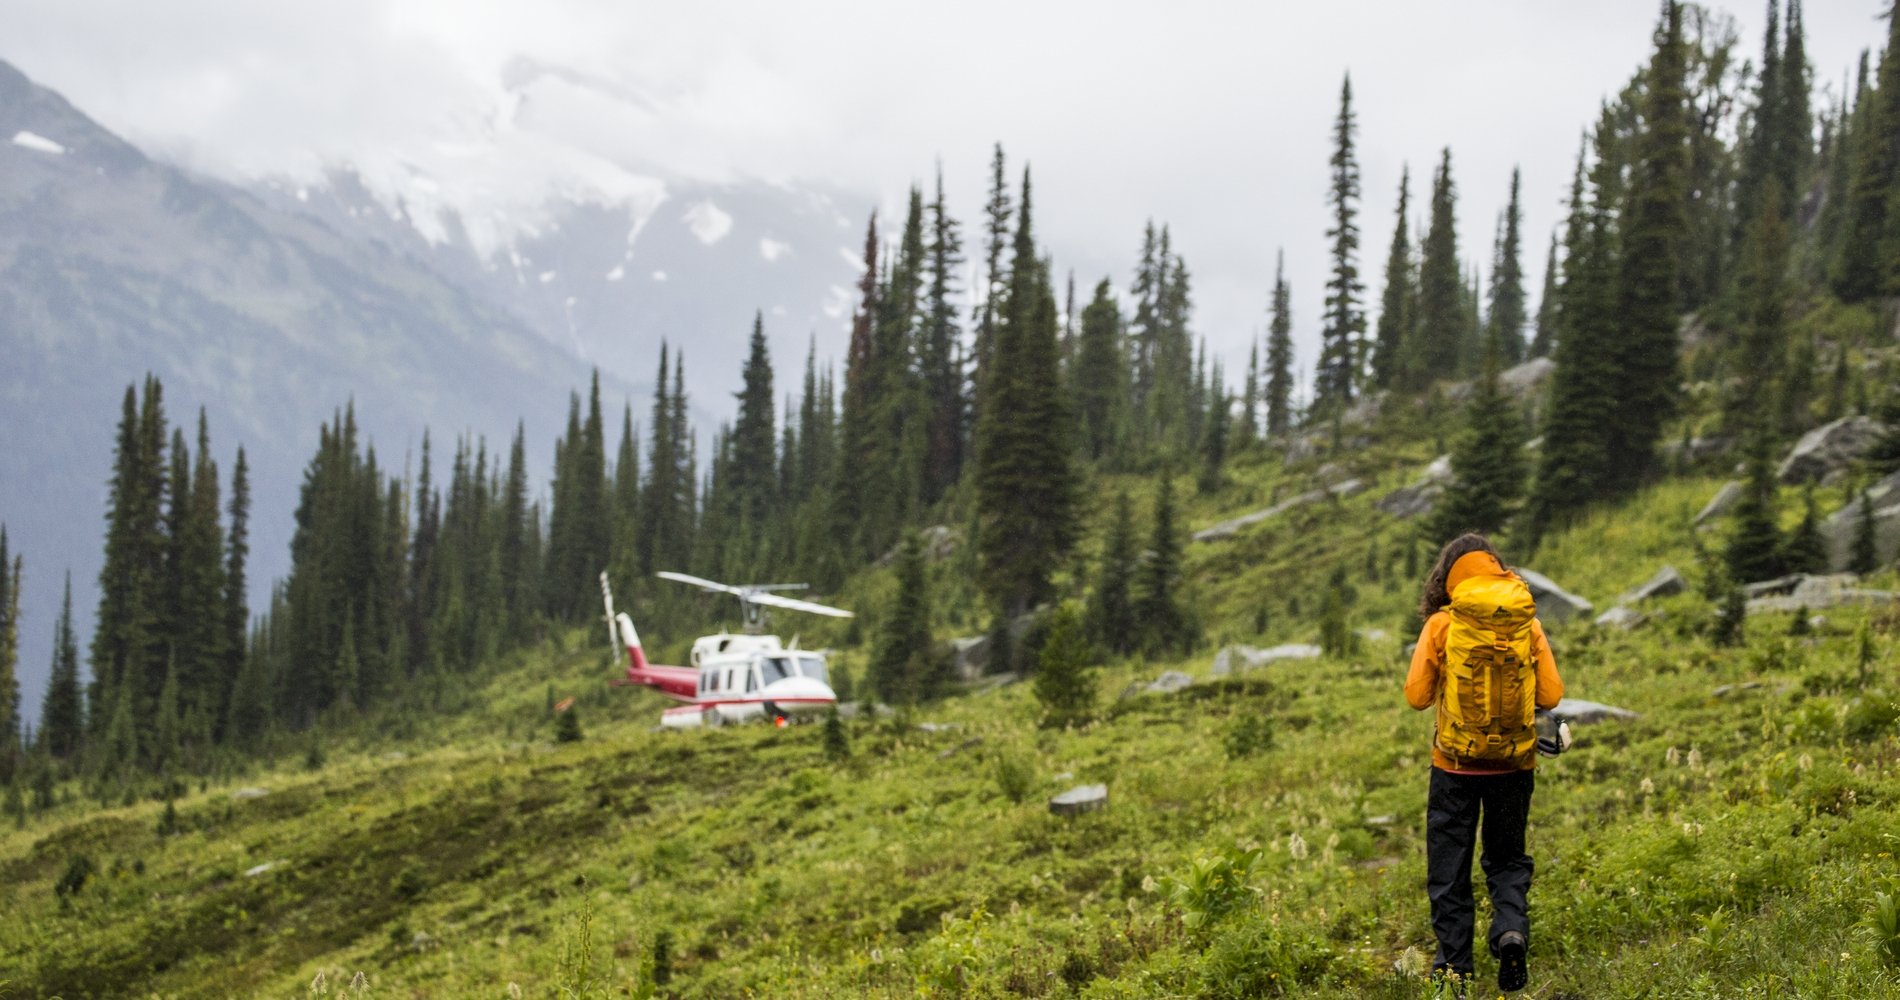 A hiker approaches a helicopter that has landed in a clearing in the woods.